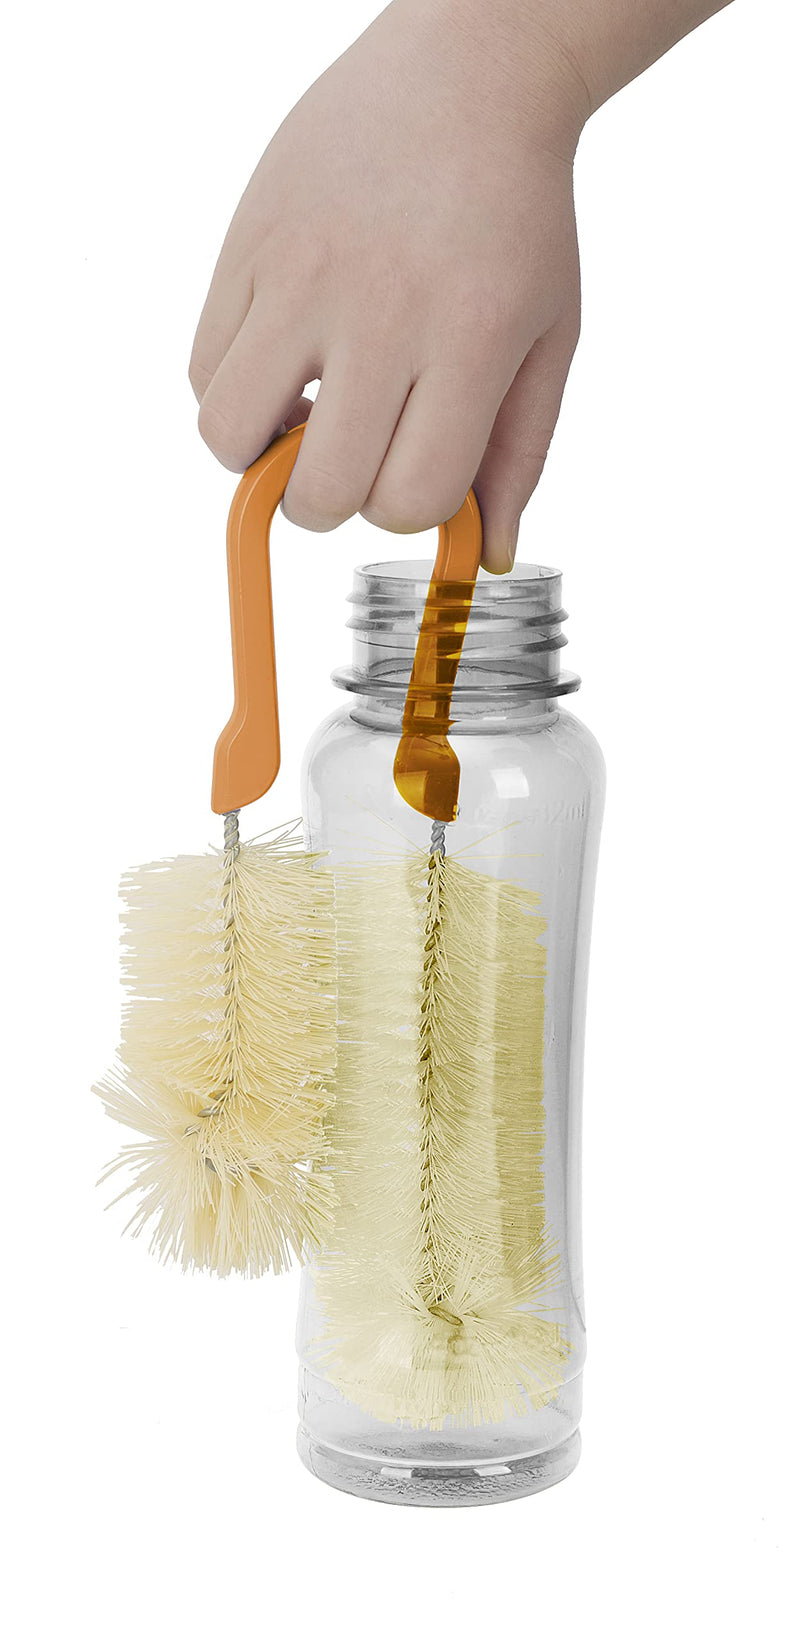 Full Circle Reach Double-Sided Bottle Cleaning Brush, Green Double Sided Bottle Brush - LeoForward Australia